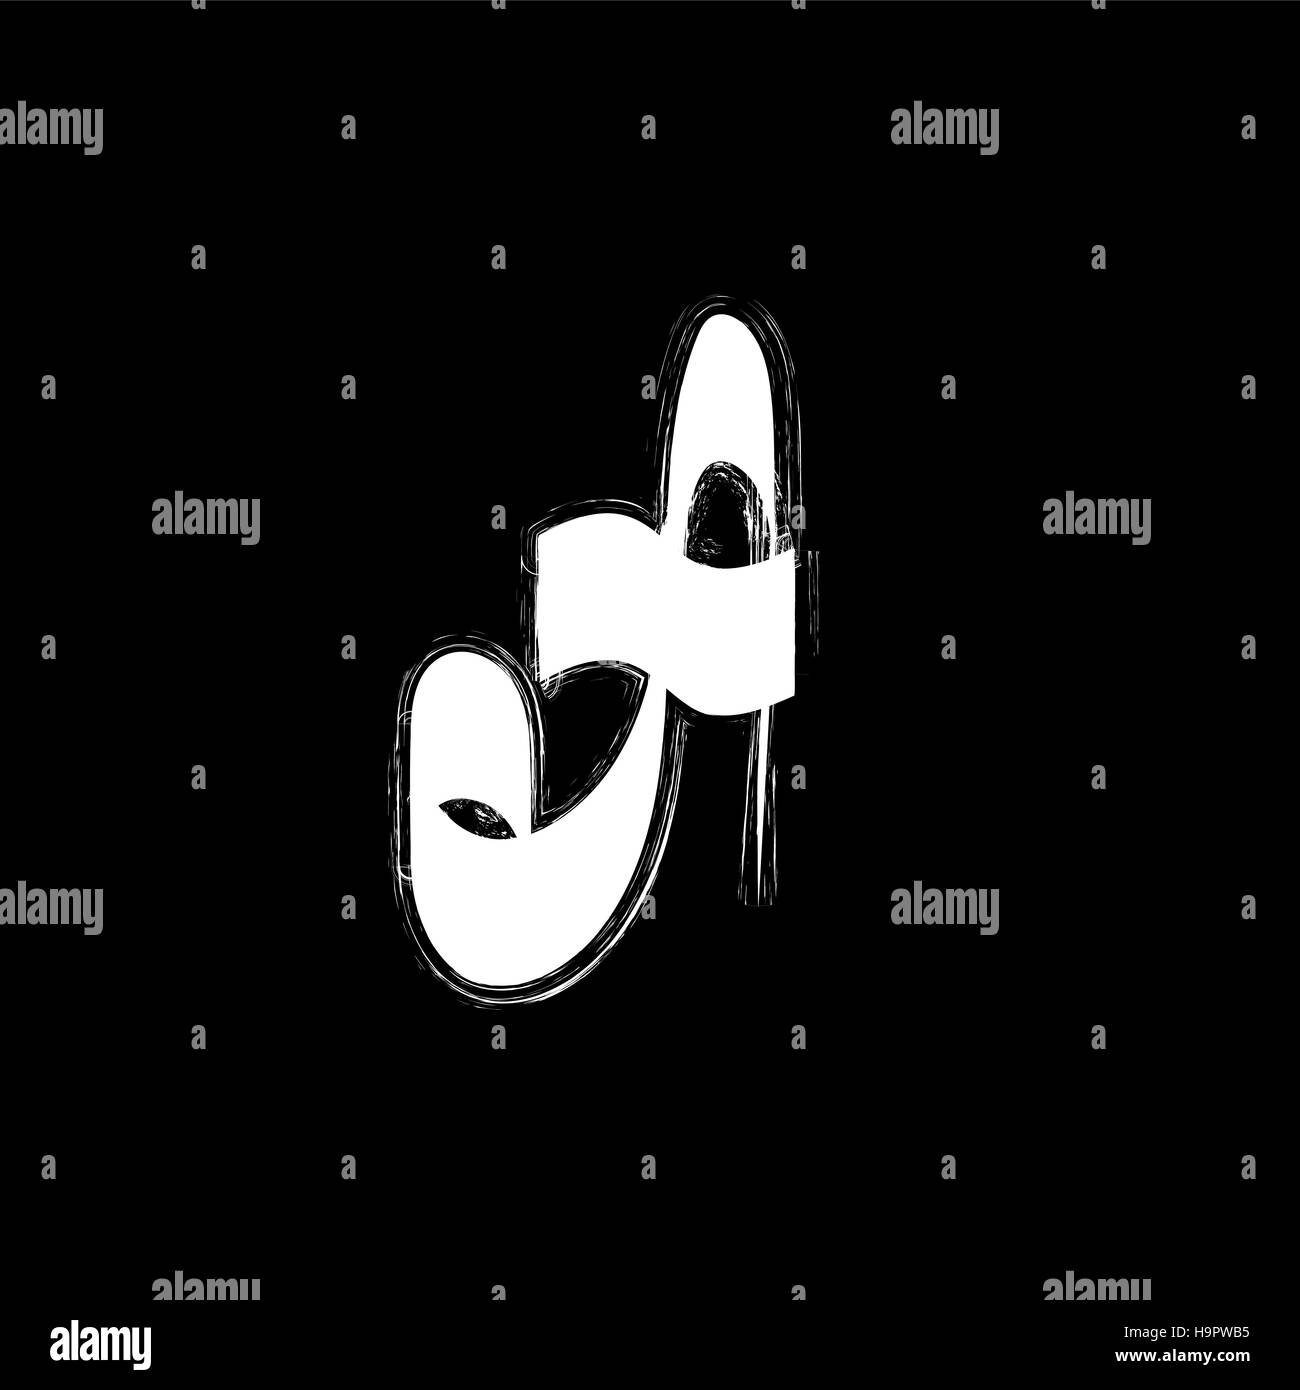 Isolated Graffiti Font Icon White Grunge Style Letter A On Black